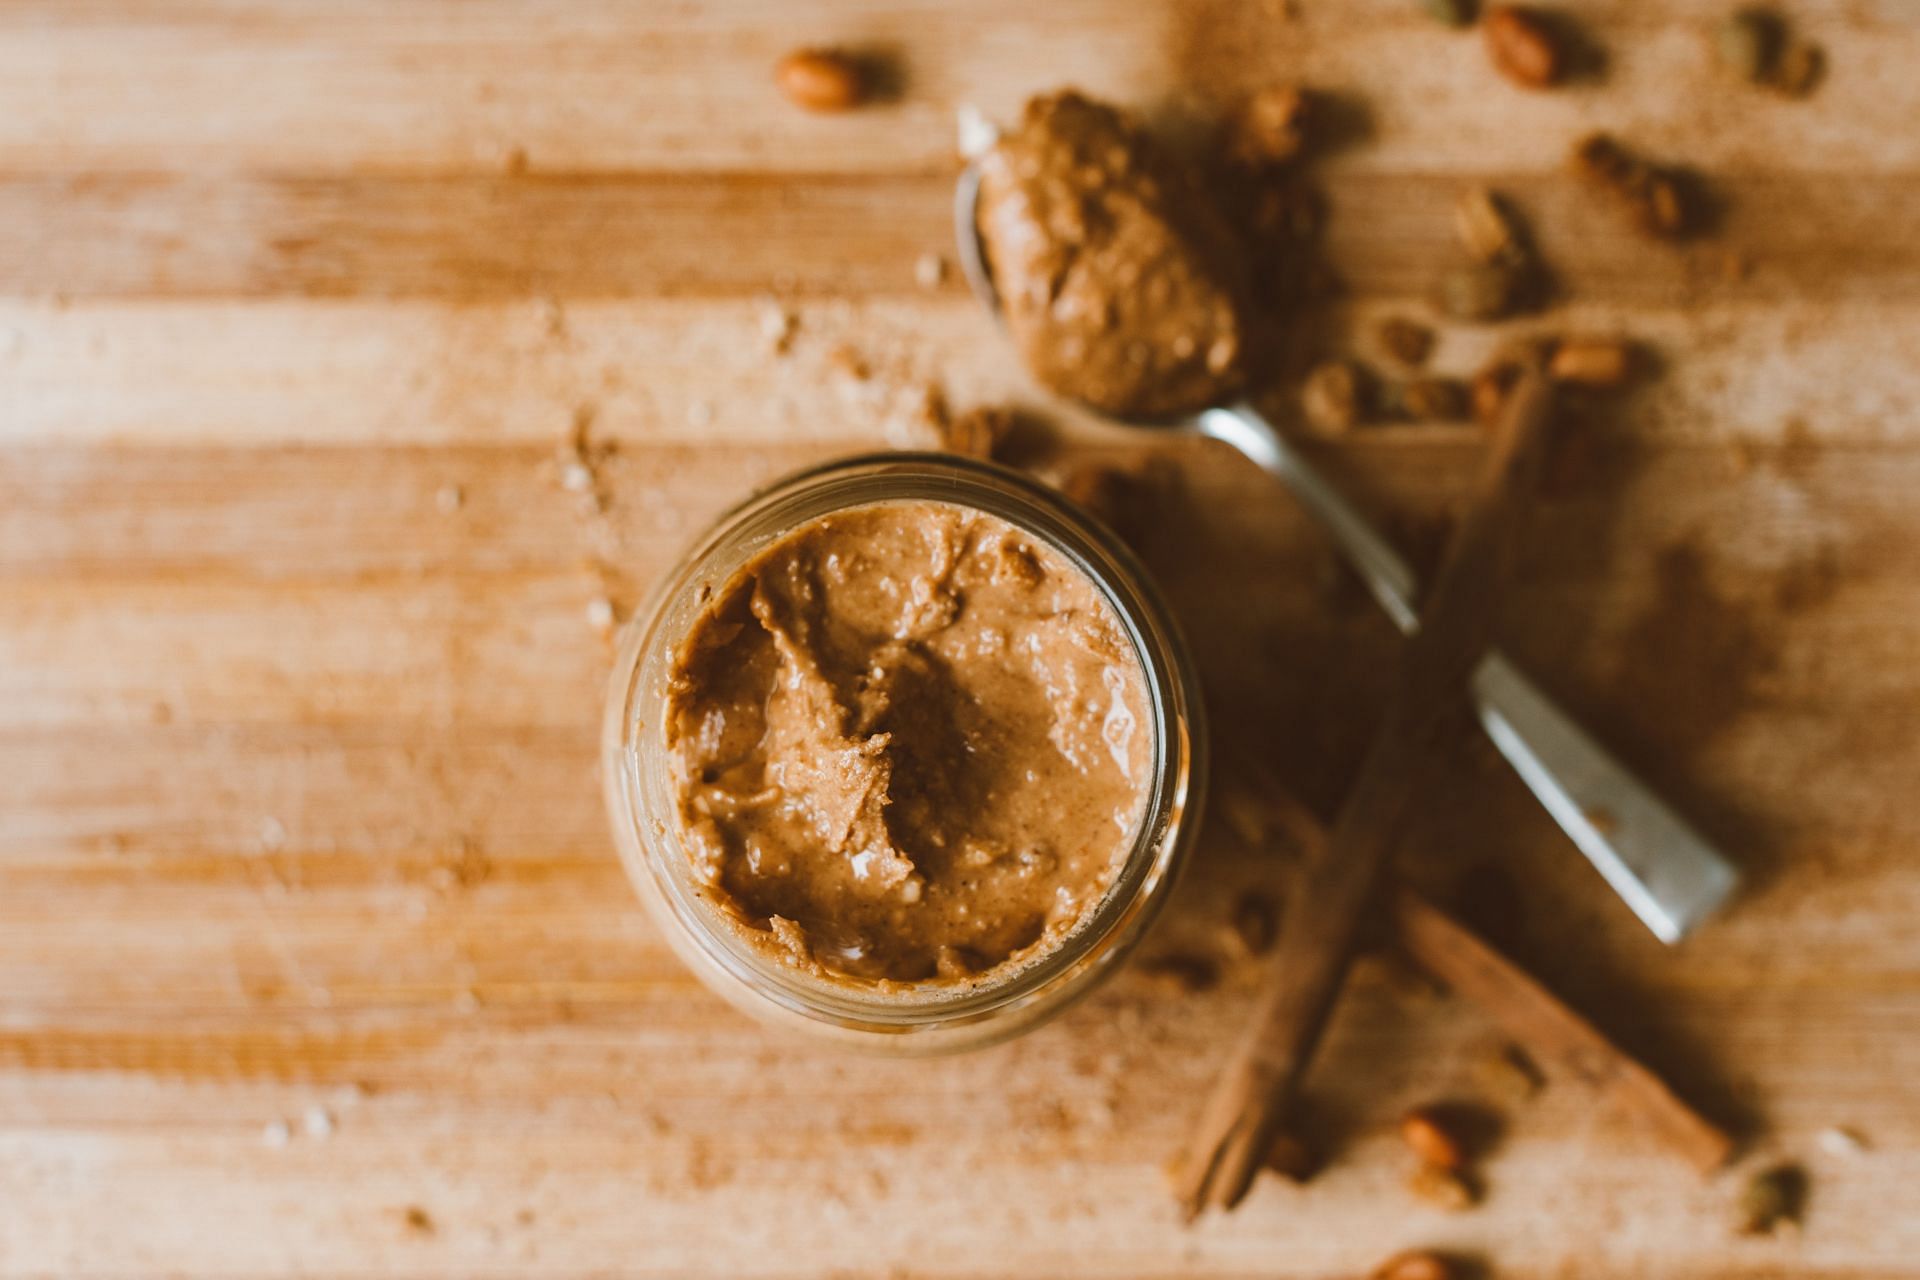 One of the best choices for nutrient-rich spreads.(Image via Pexels/ Roman Odintsov)